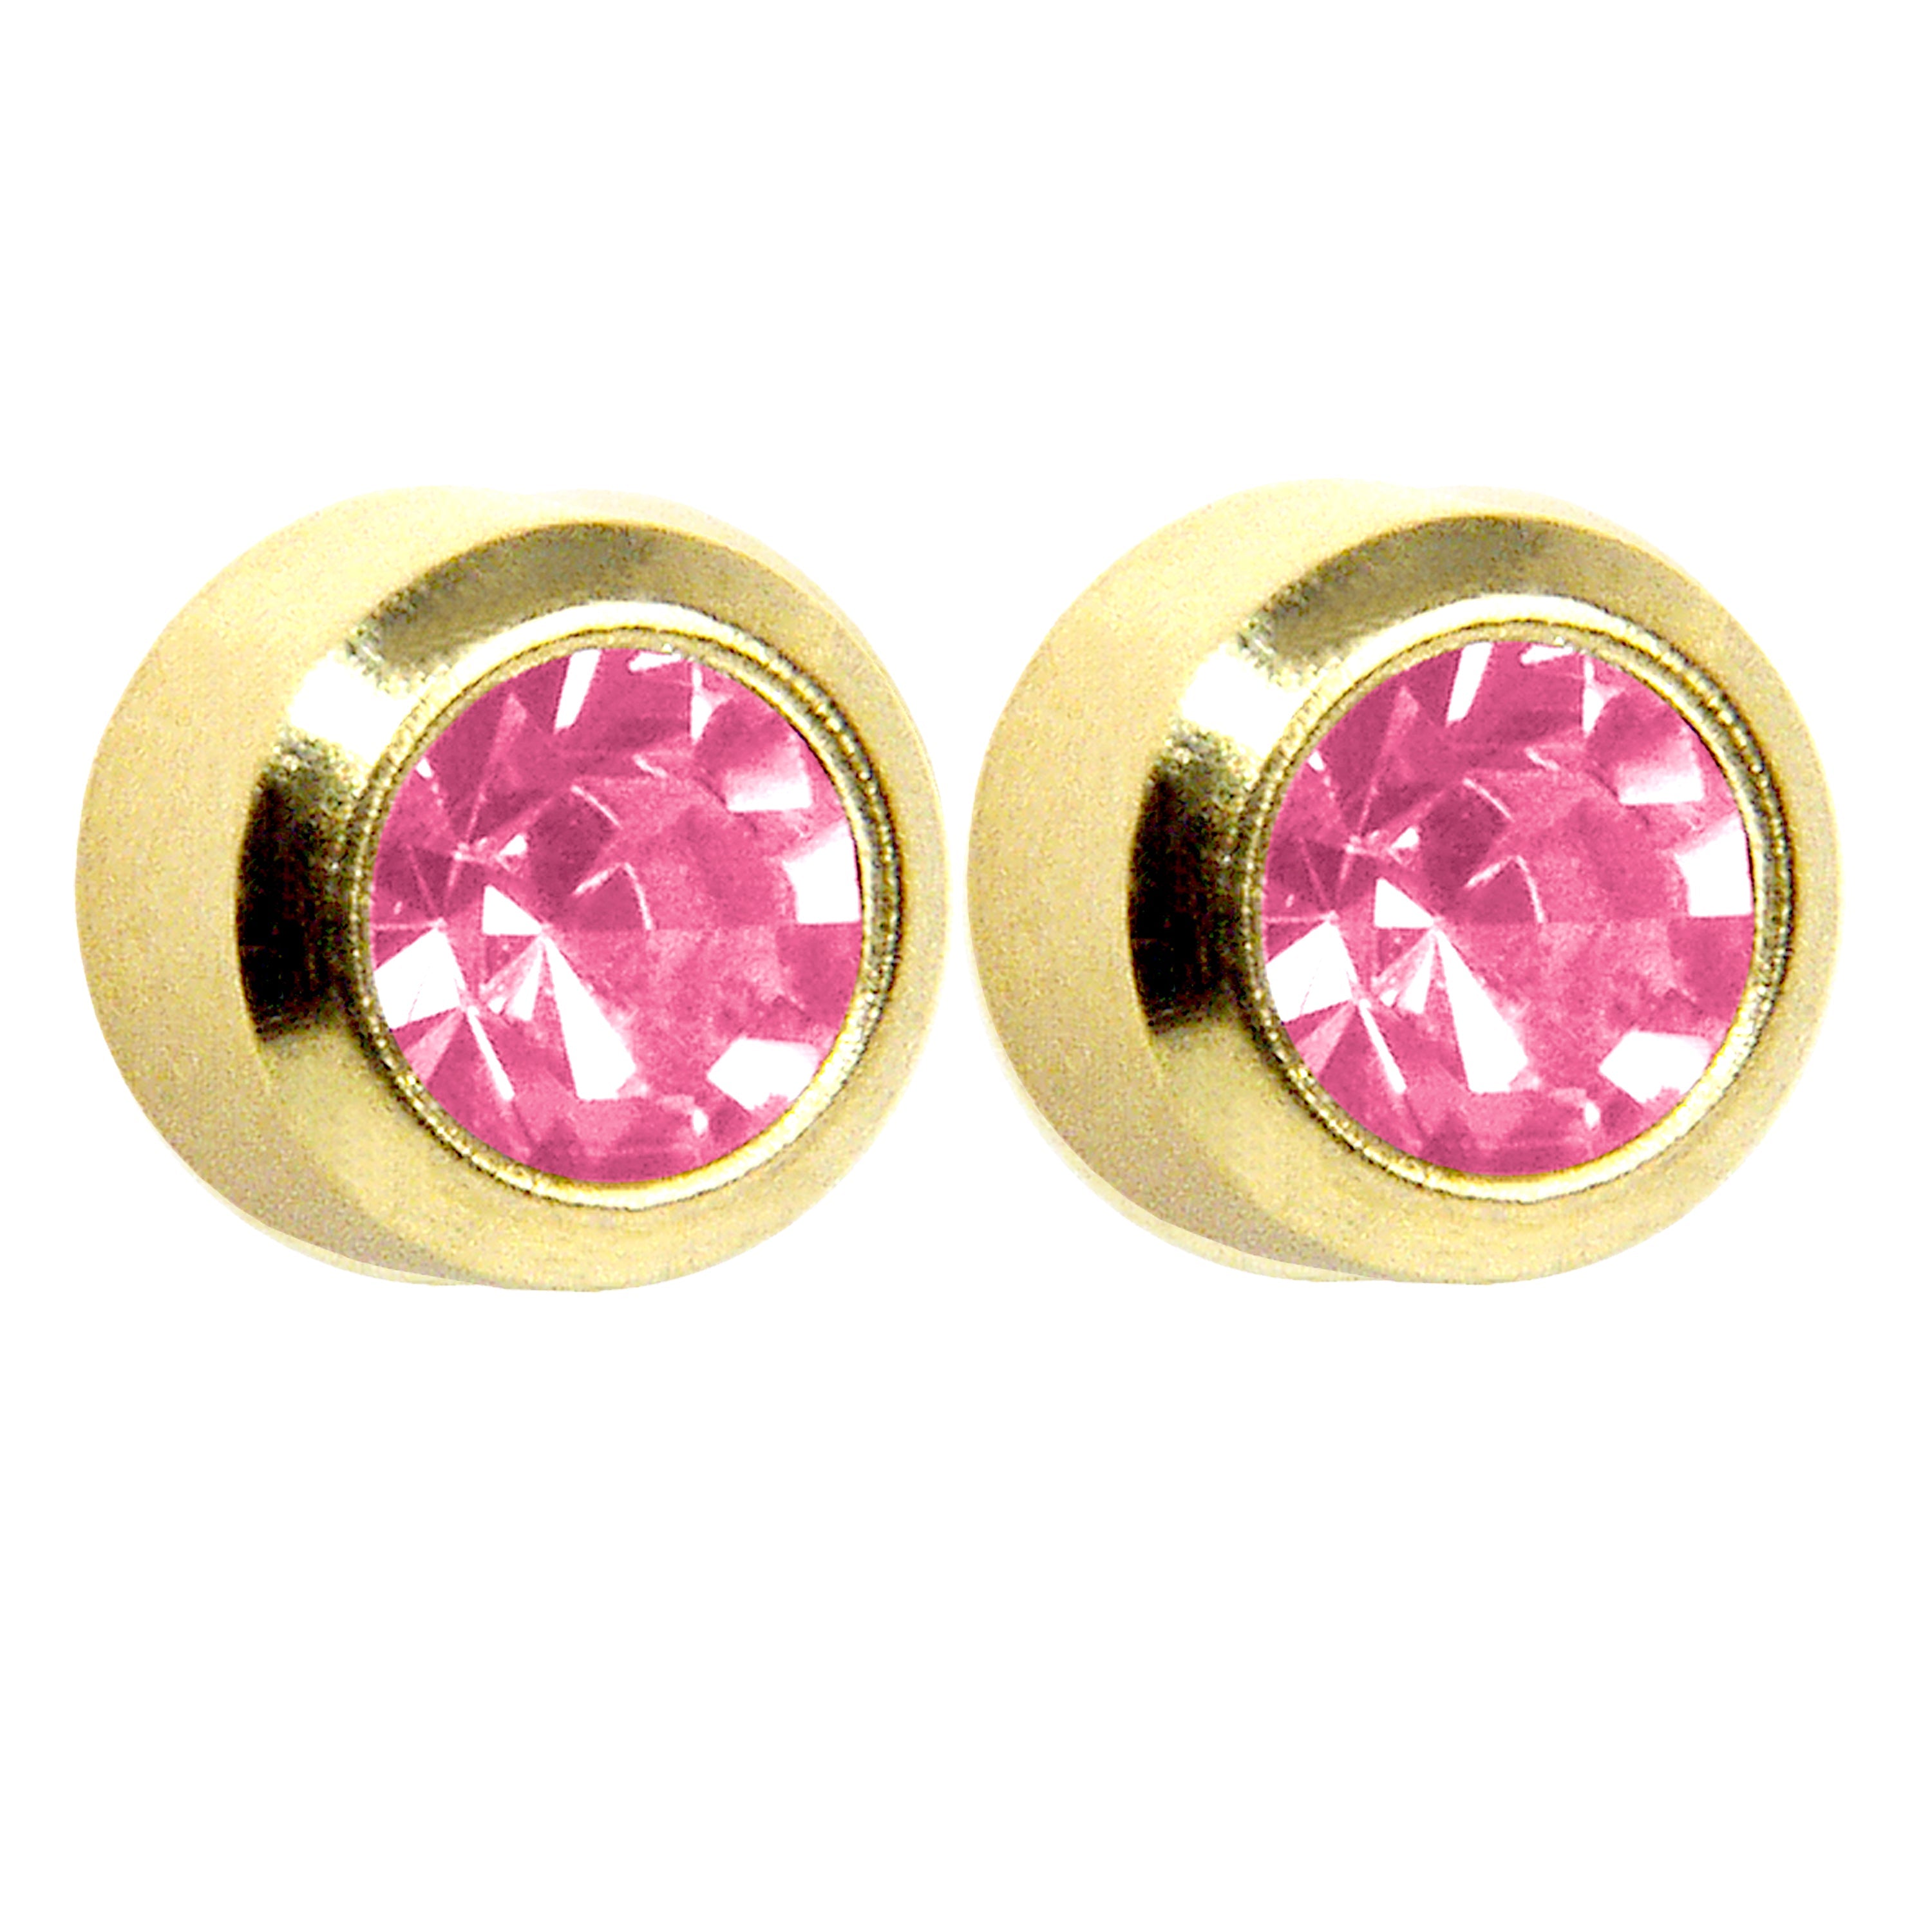 3MM October – Rose Bezel 24K Pure Gold Plated Ear Studs | MADE IN USA | Ideal for everyday wear